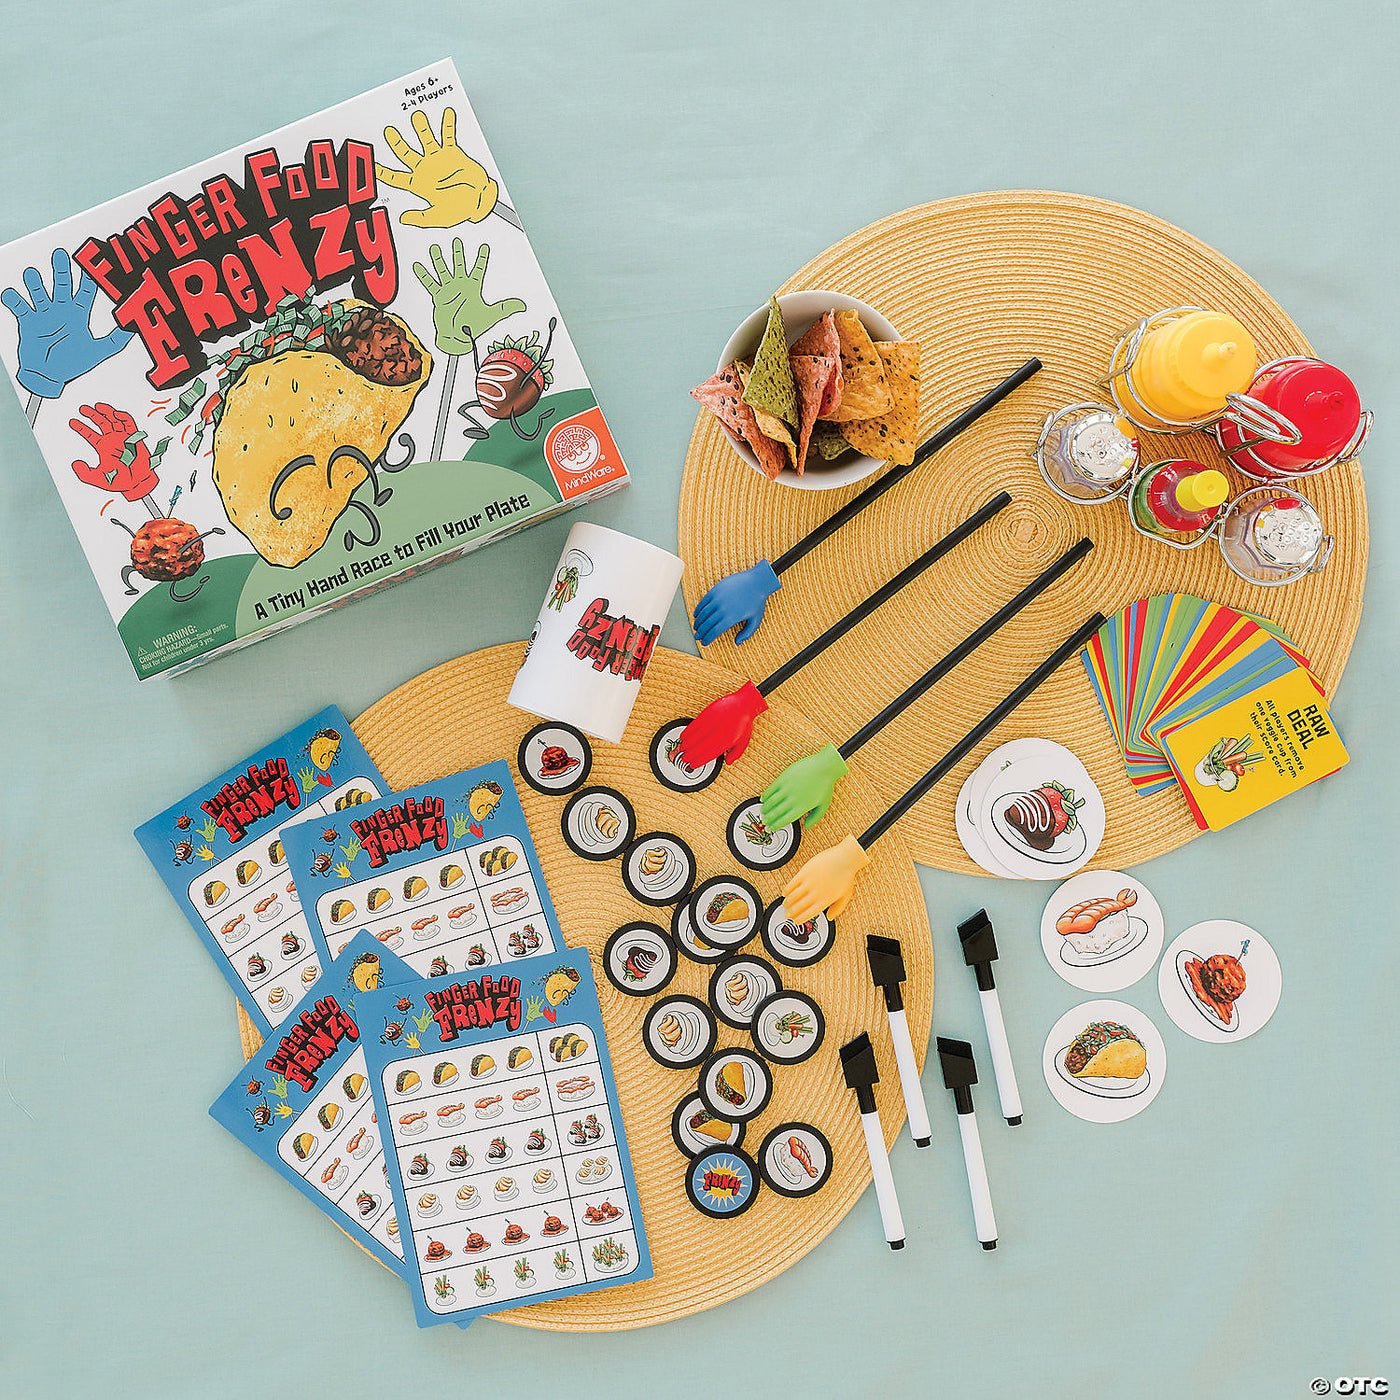 Finger Food Frenzy Family Board Game